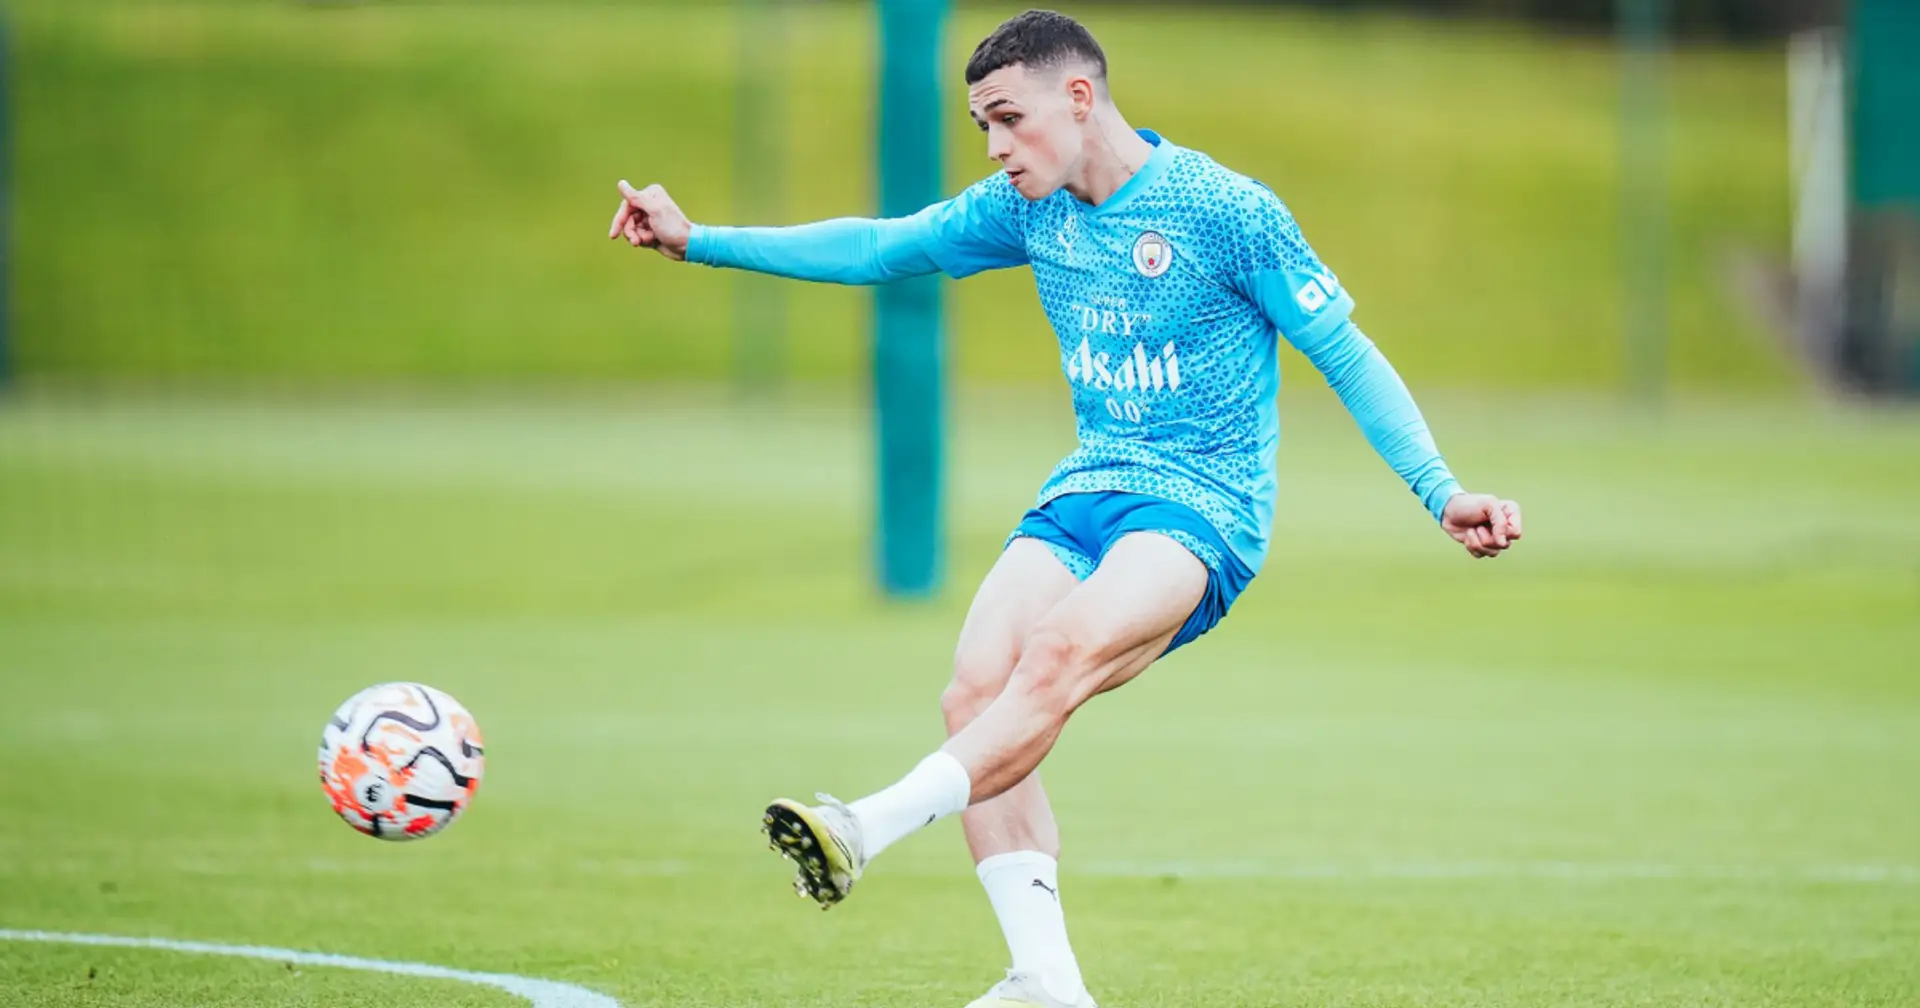 'I don’t mind the pressure': Foden on playing in a more central role for Man City